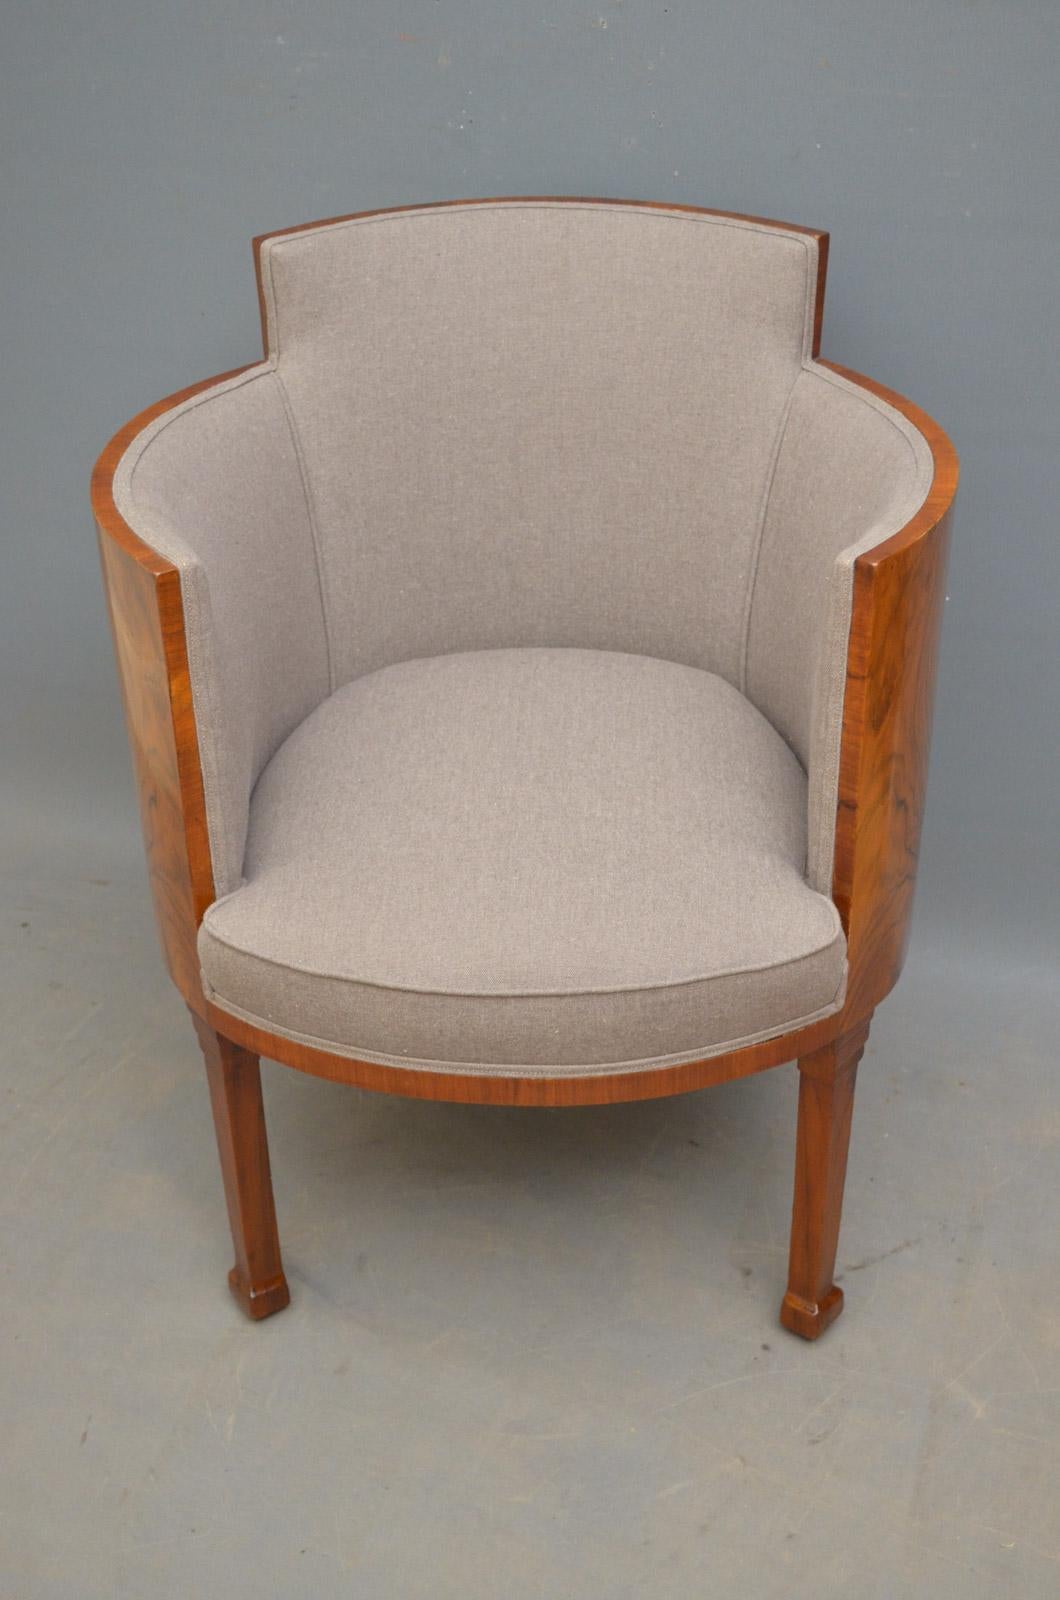 K0135 Unusual and very elegant, walnut Art Deco tub chair, having figured walnut shaped back and arms and stylish contemporary cover in grey, standing on tapered legs with stepped decoration. This antique armchair has been sympathetically restored